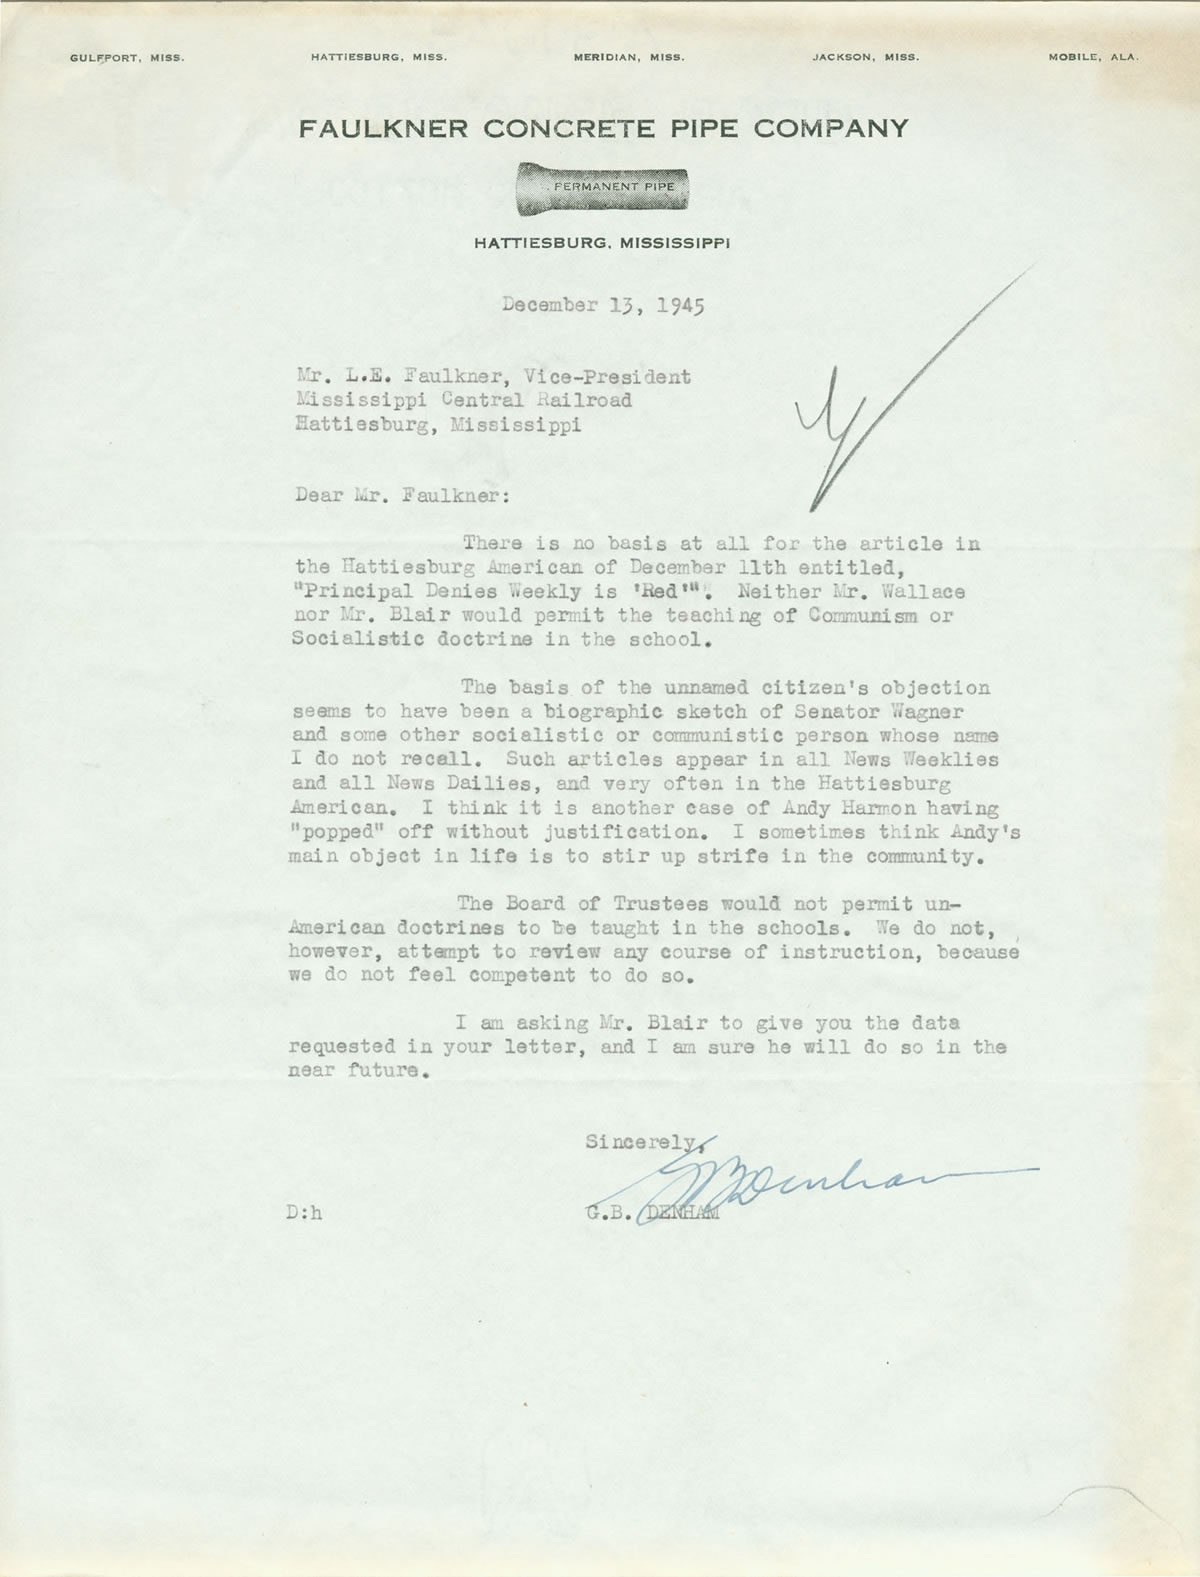 Letter from Hattiesburg Public Schools Board Member G.B. Denham to L.E. Faulkner about the use of Weekly News Review at Hattiesburg High School  